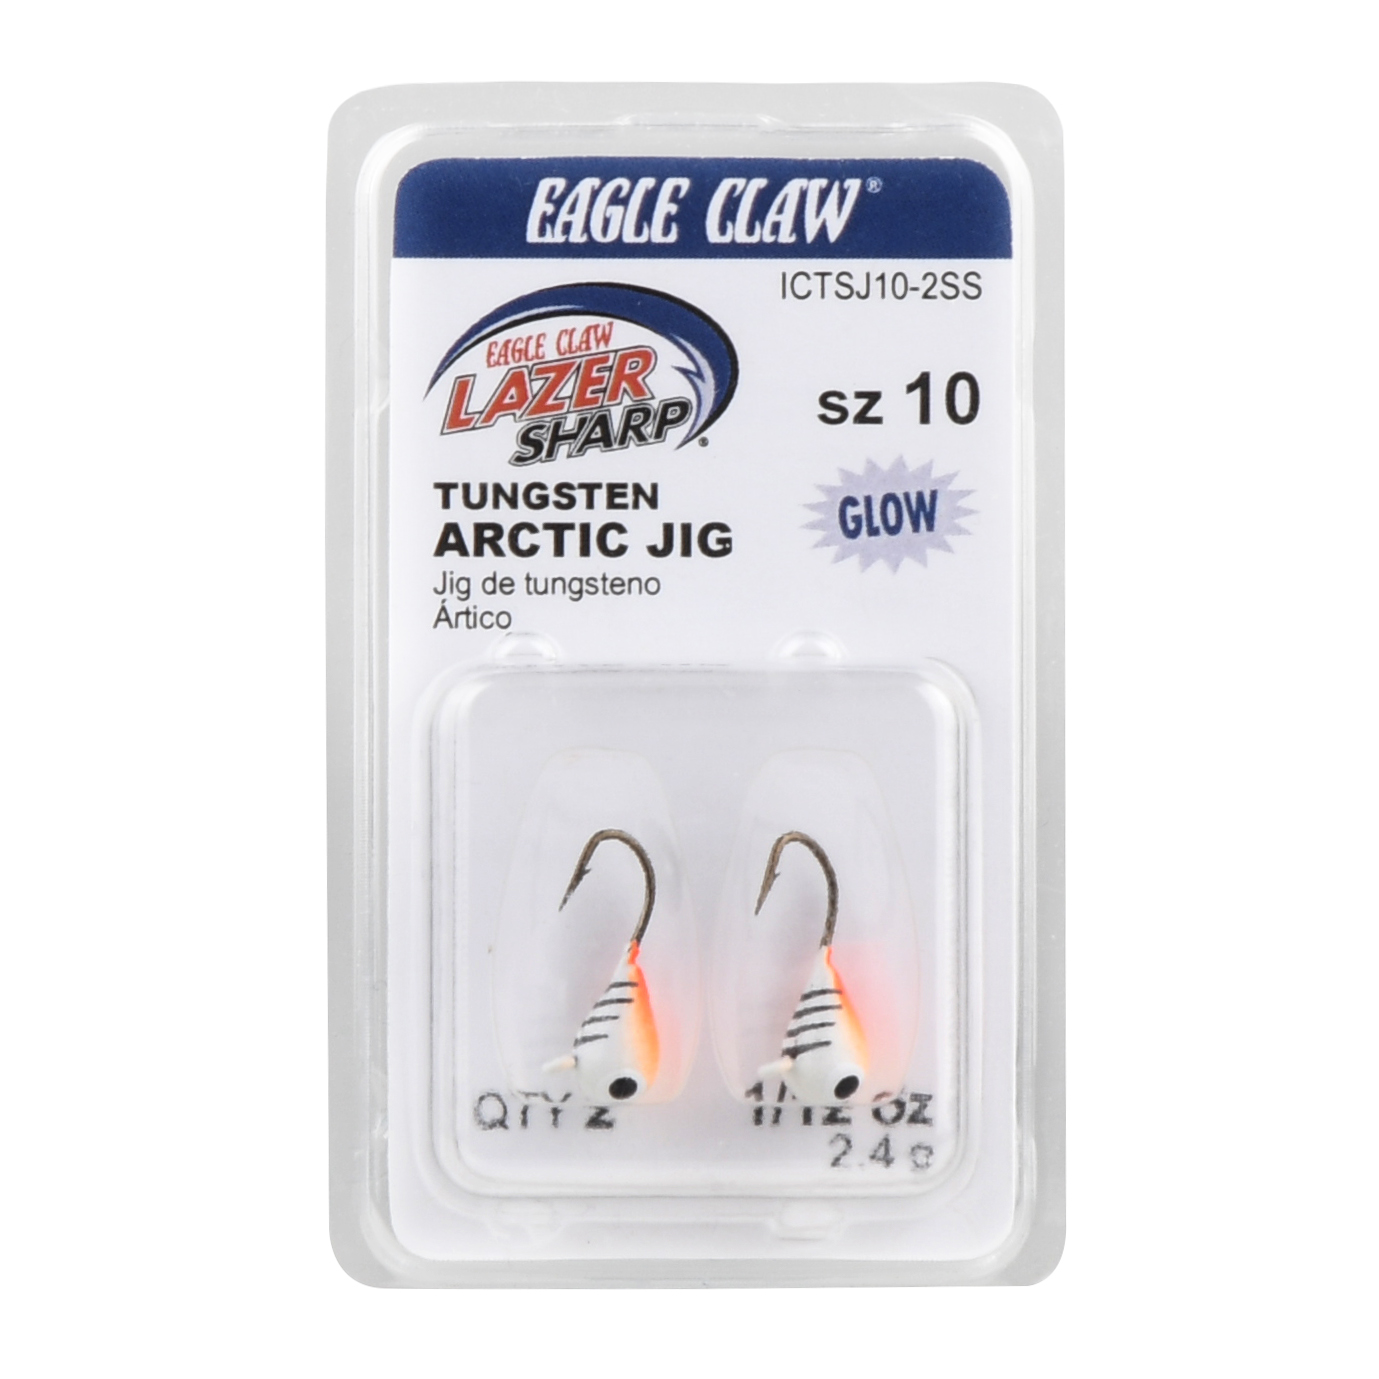 Eagle Claw Lazer Sharp Tungsten Arctic Jig, Silver Striped, 2 Count, ICTSJ10-2SS - image 1 of 2